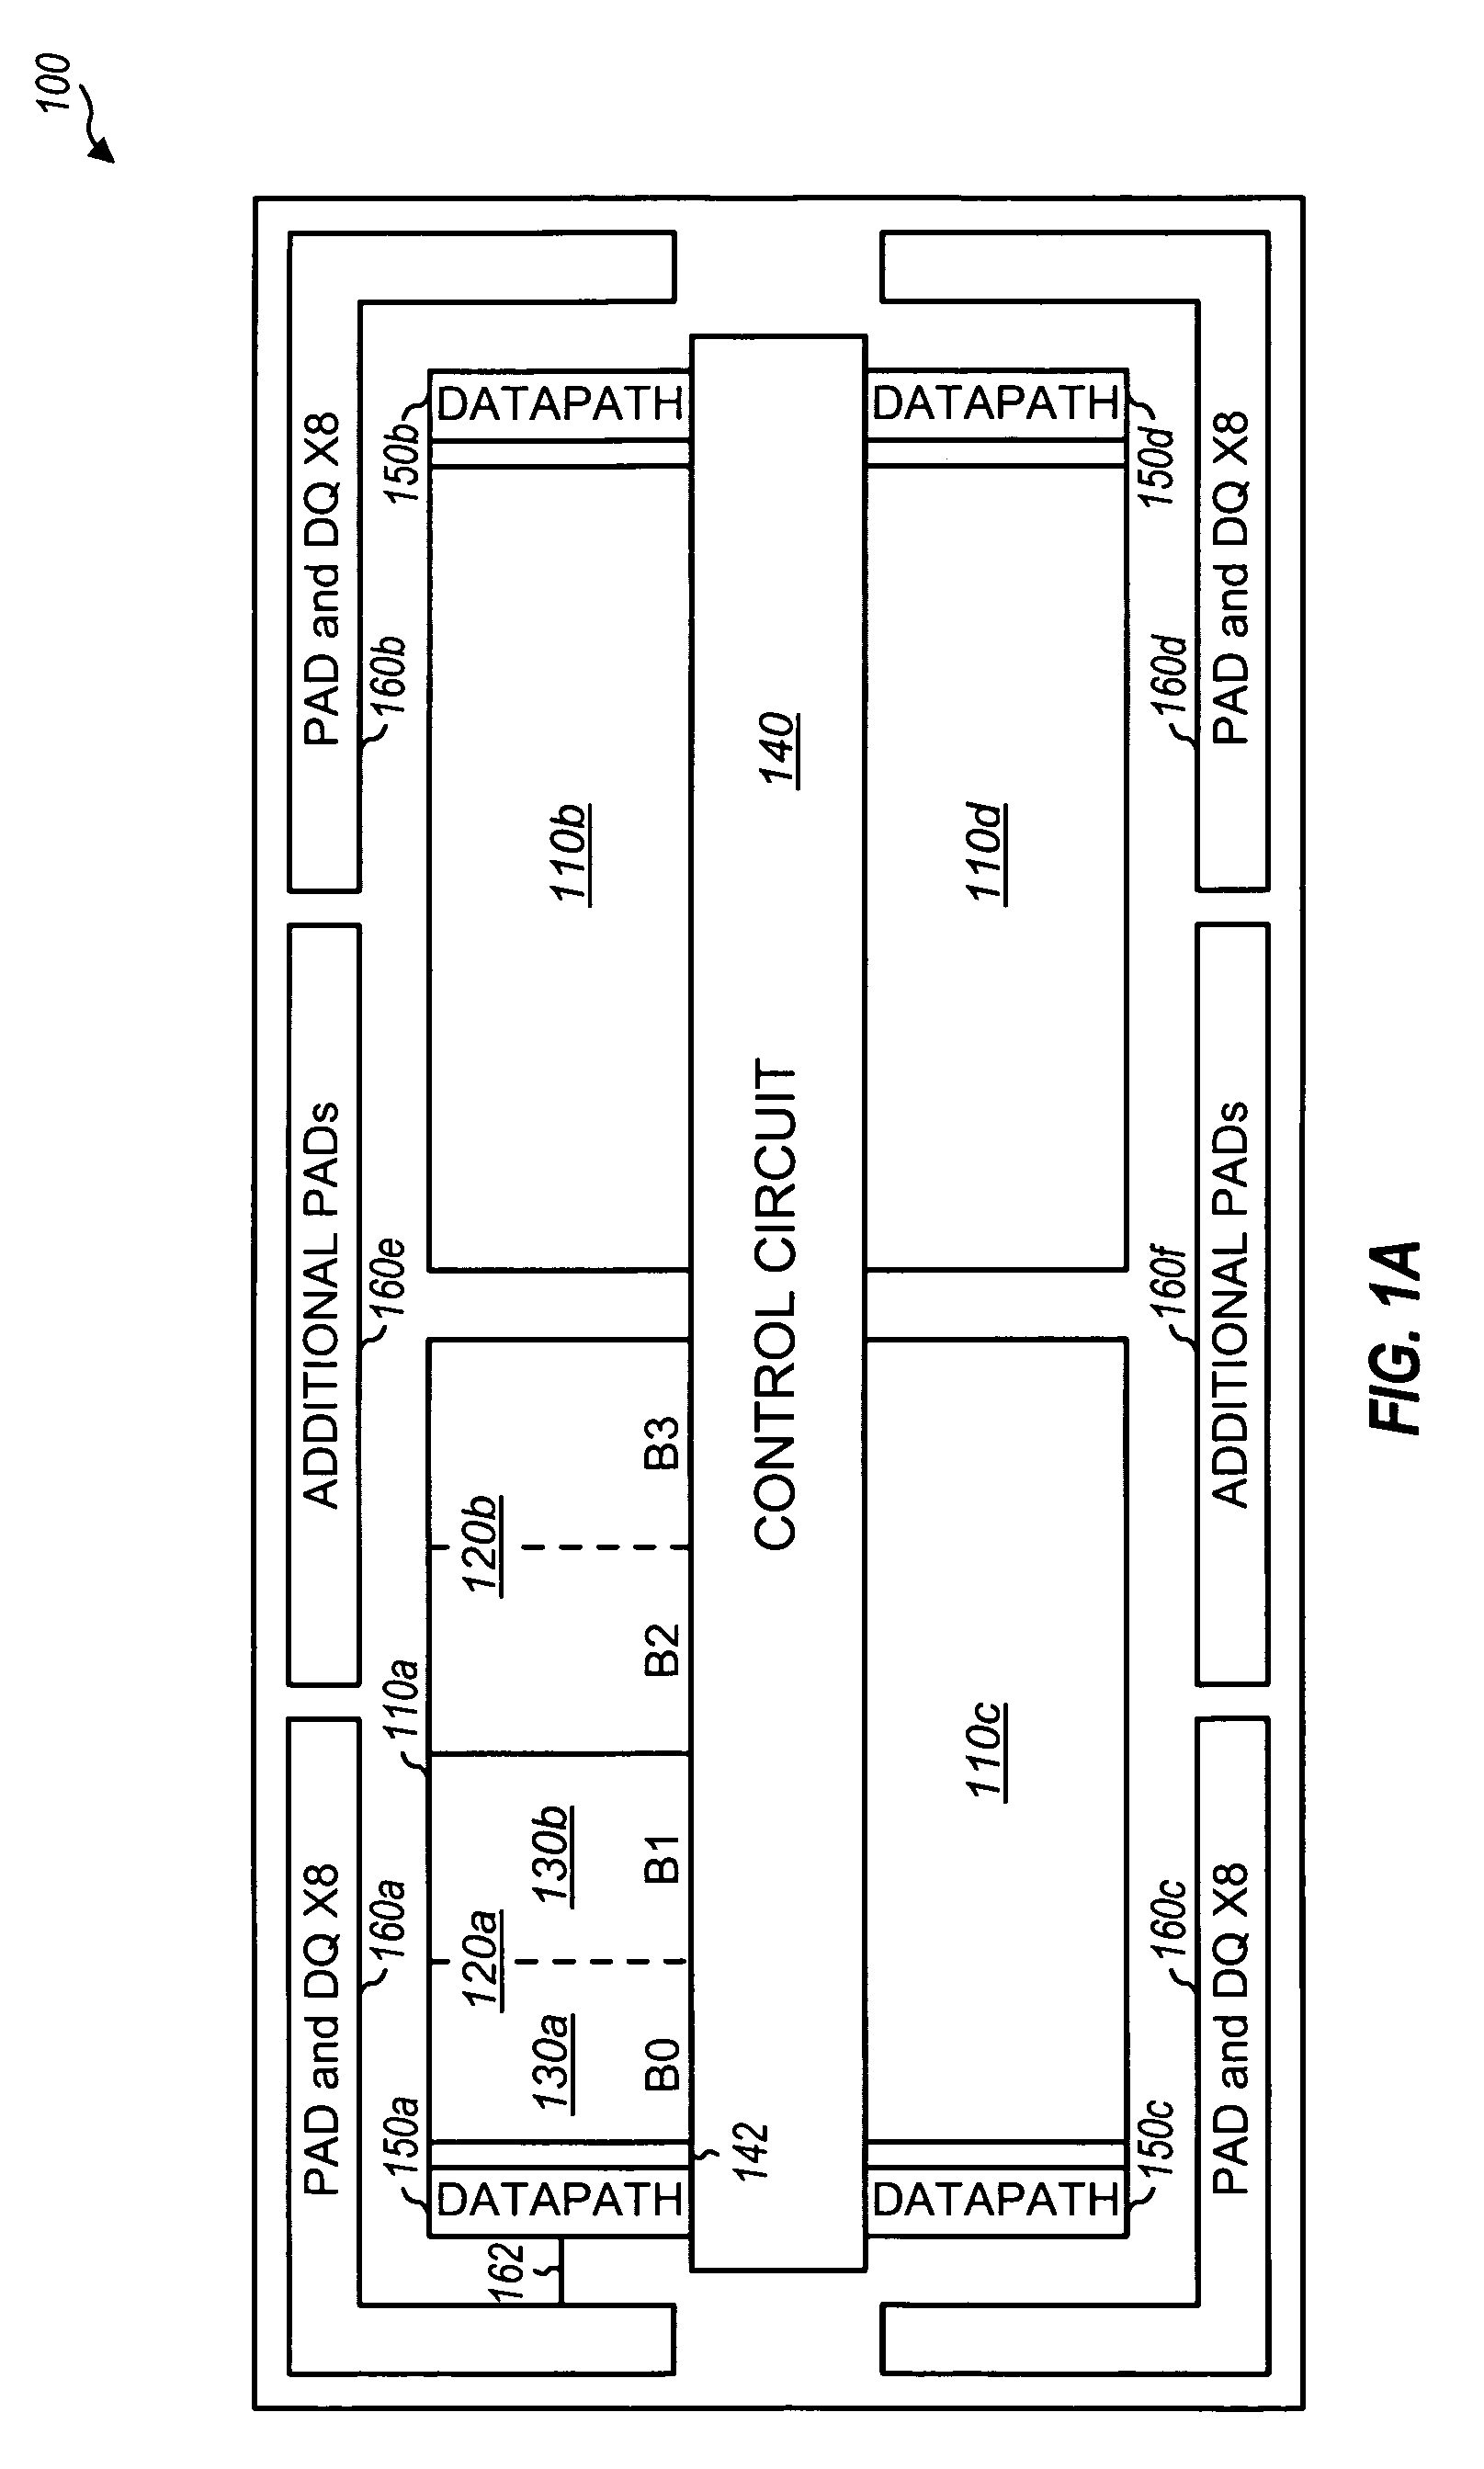 Data input and output circuits for multi-data rate operation